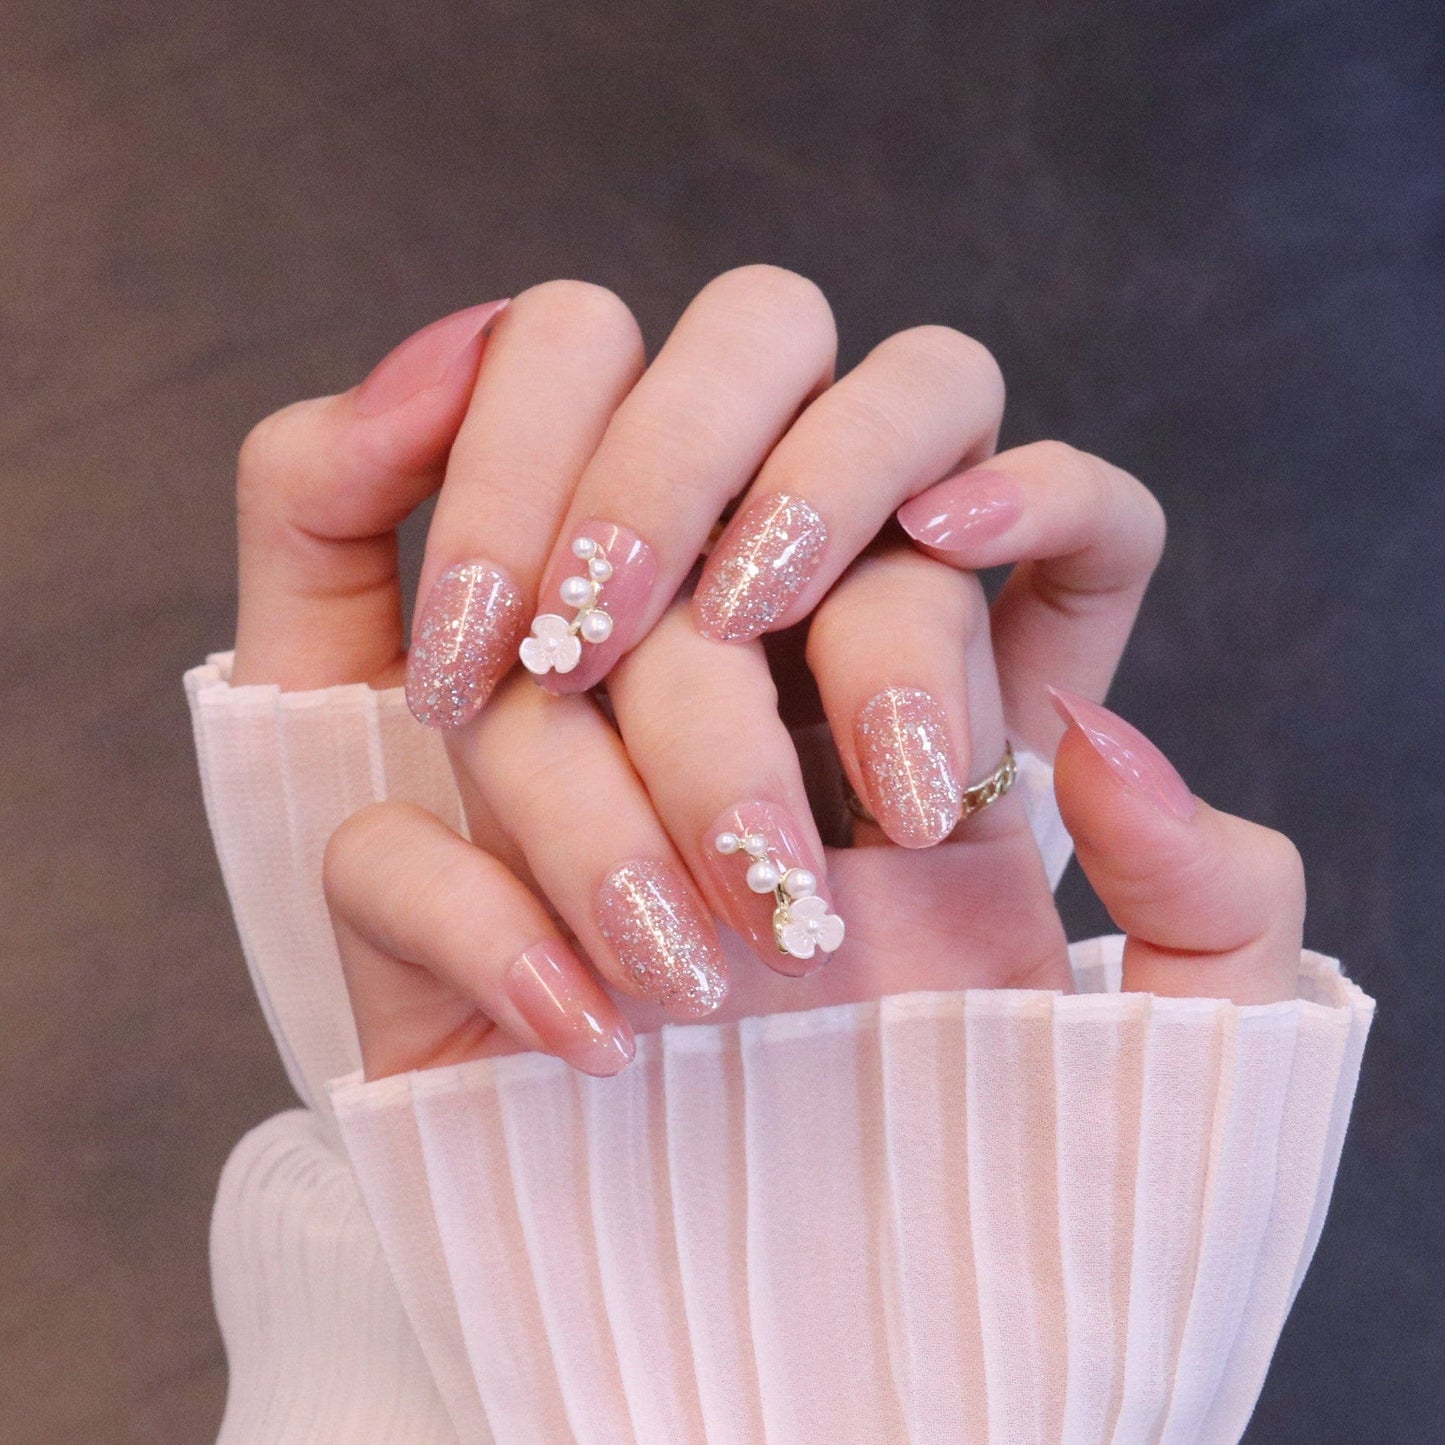 Medium Rounded Baby Pink Press On Nails with Flower and Pearl Charms